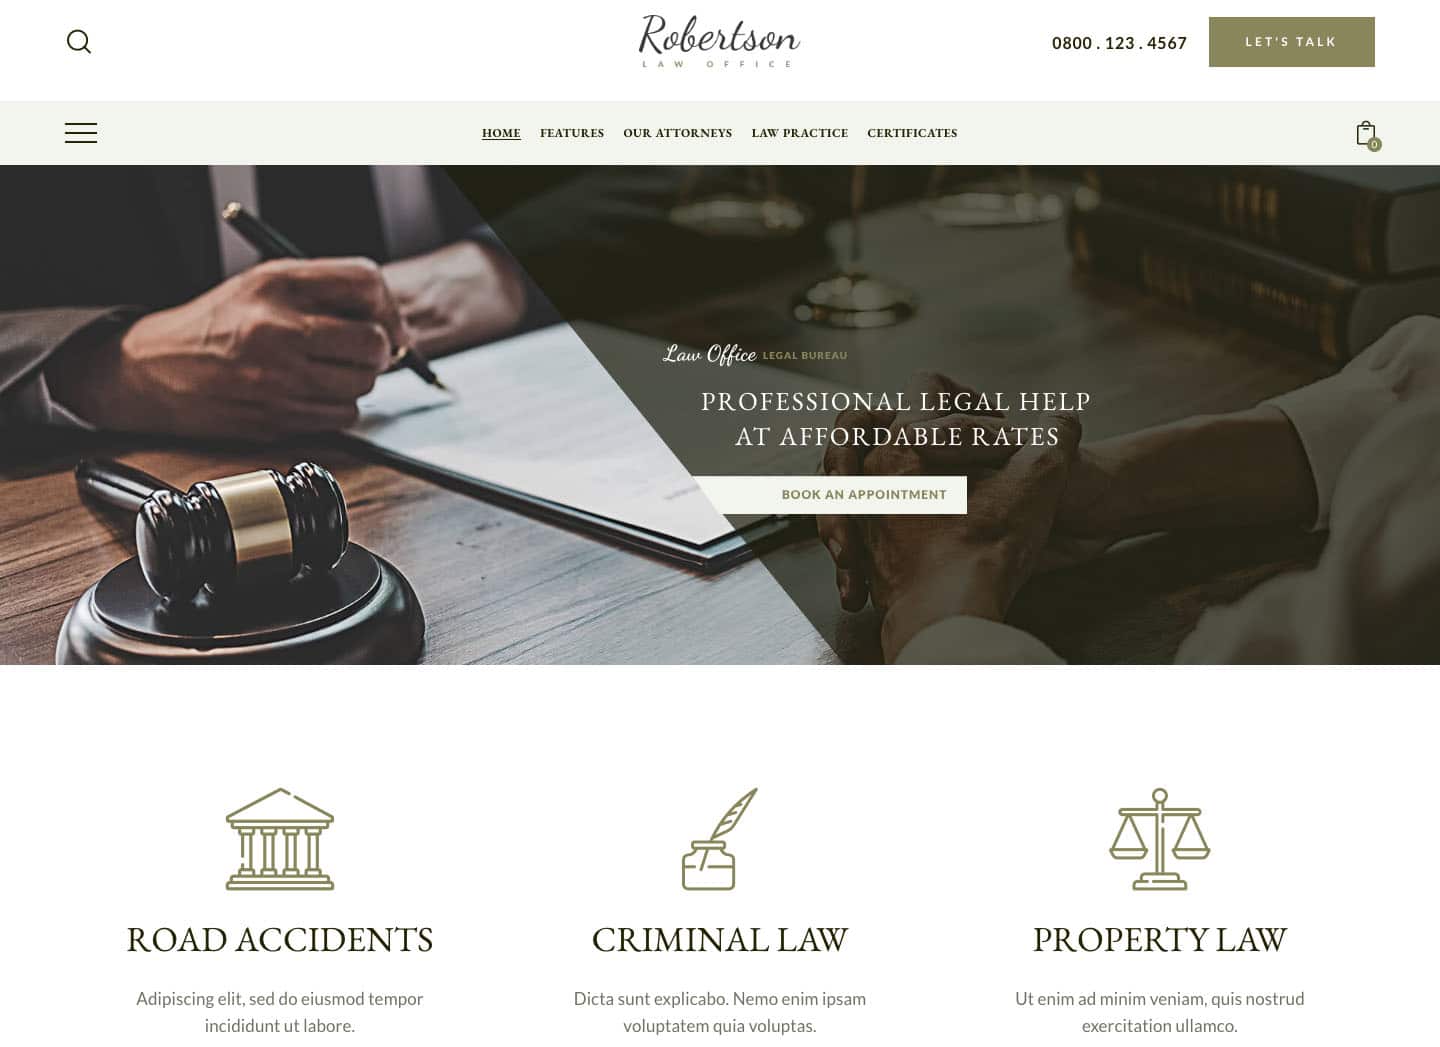 Law Office Review - Attorney & Legal Adviser WordPress Theme Website Template